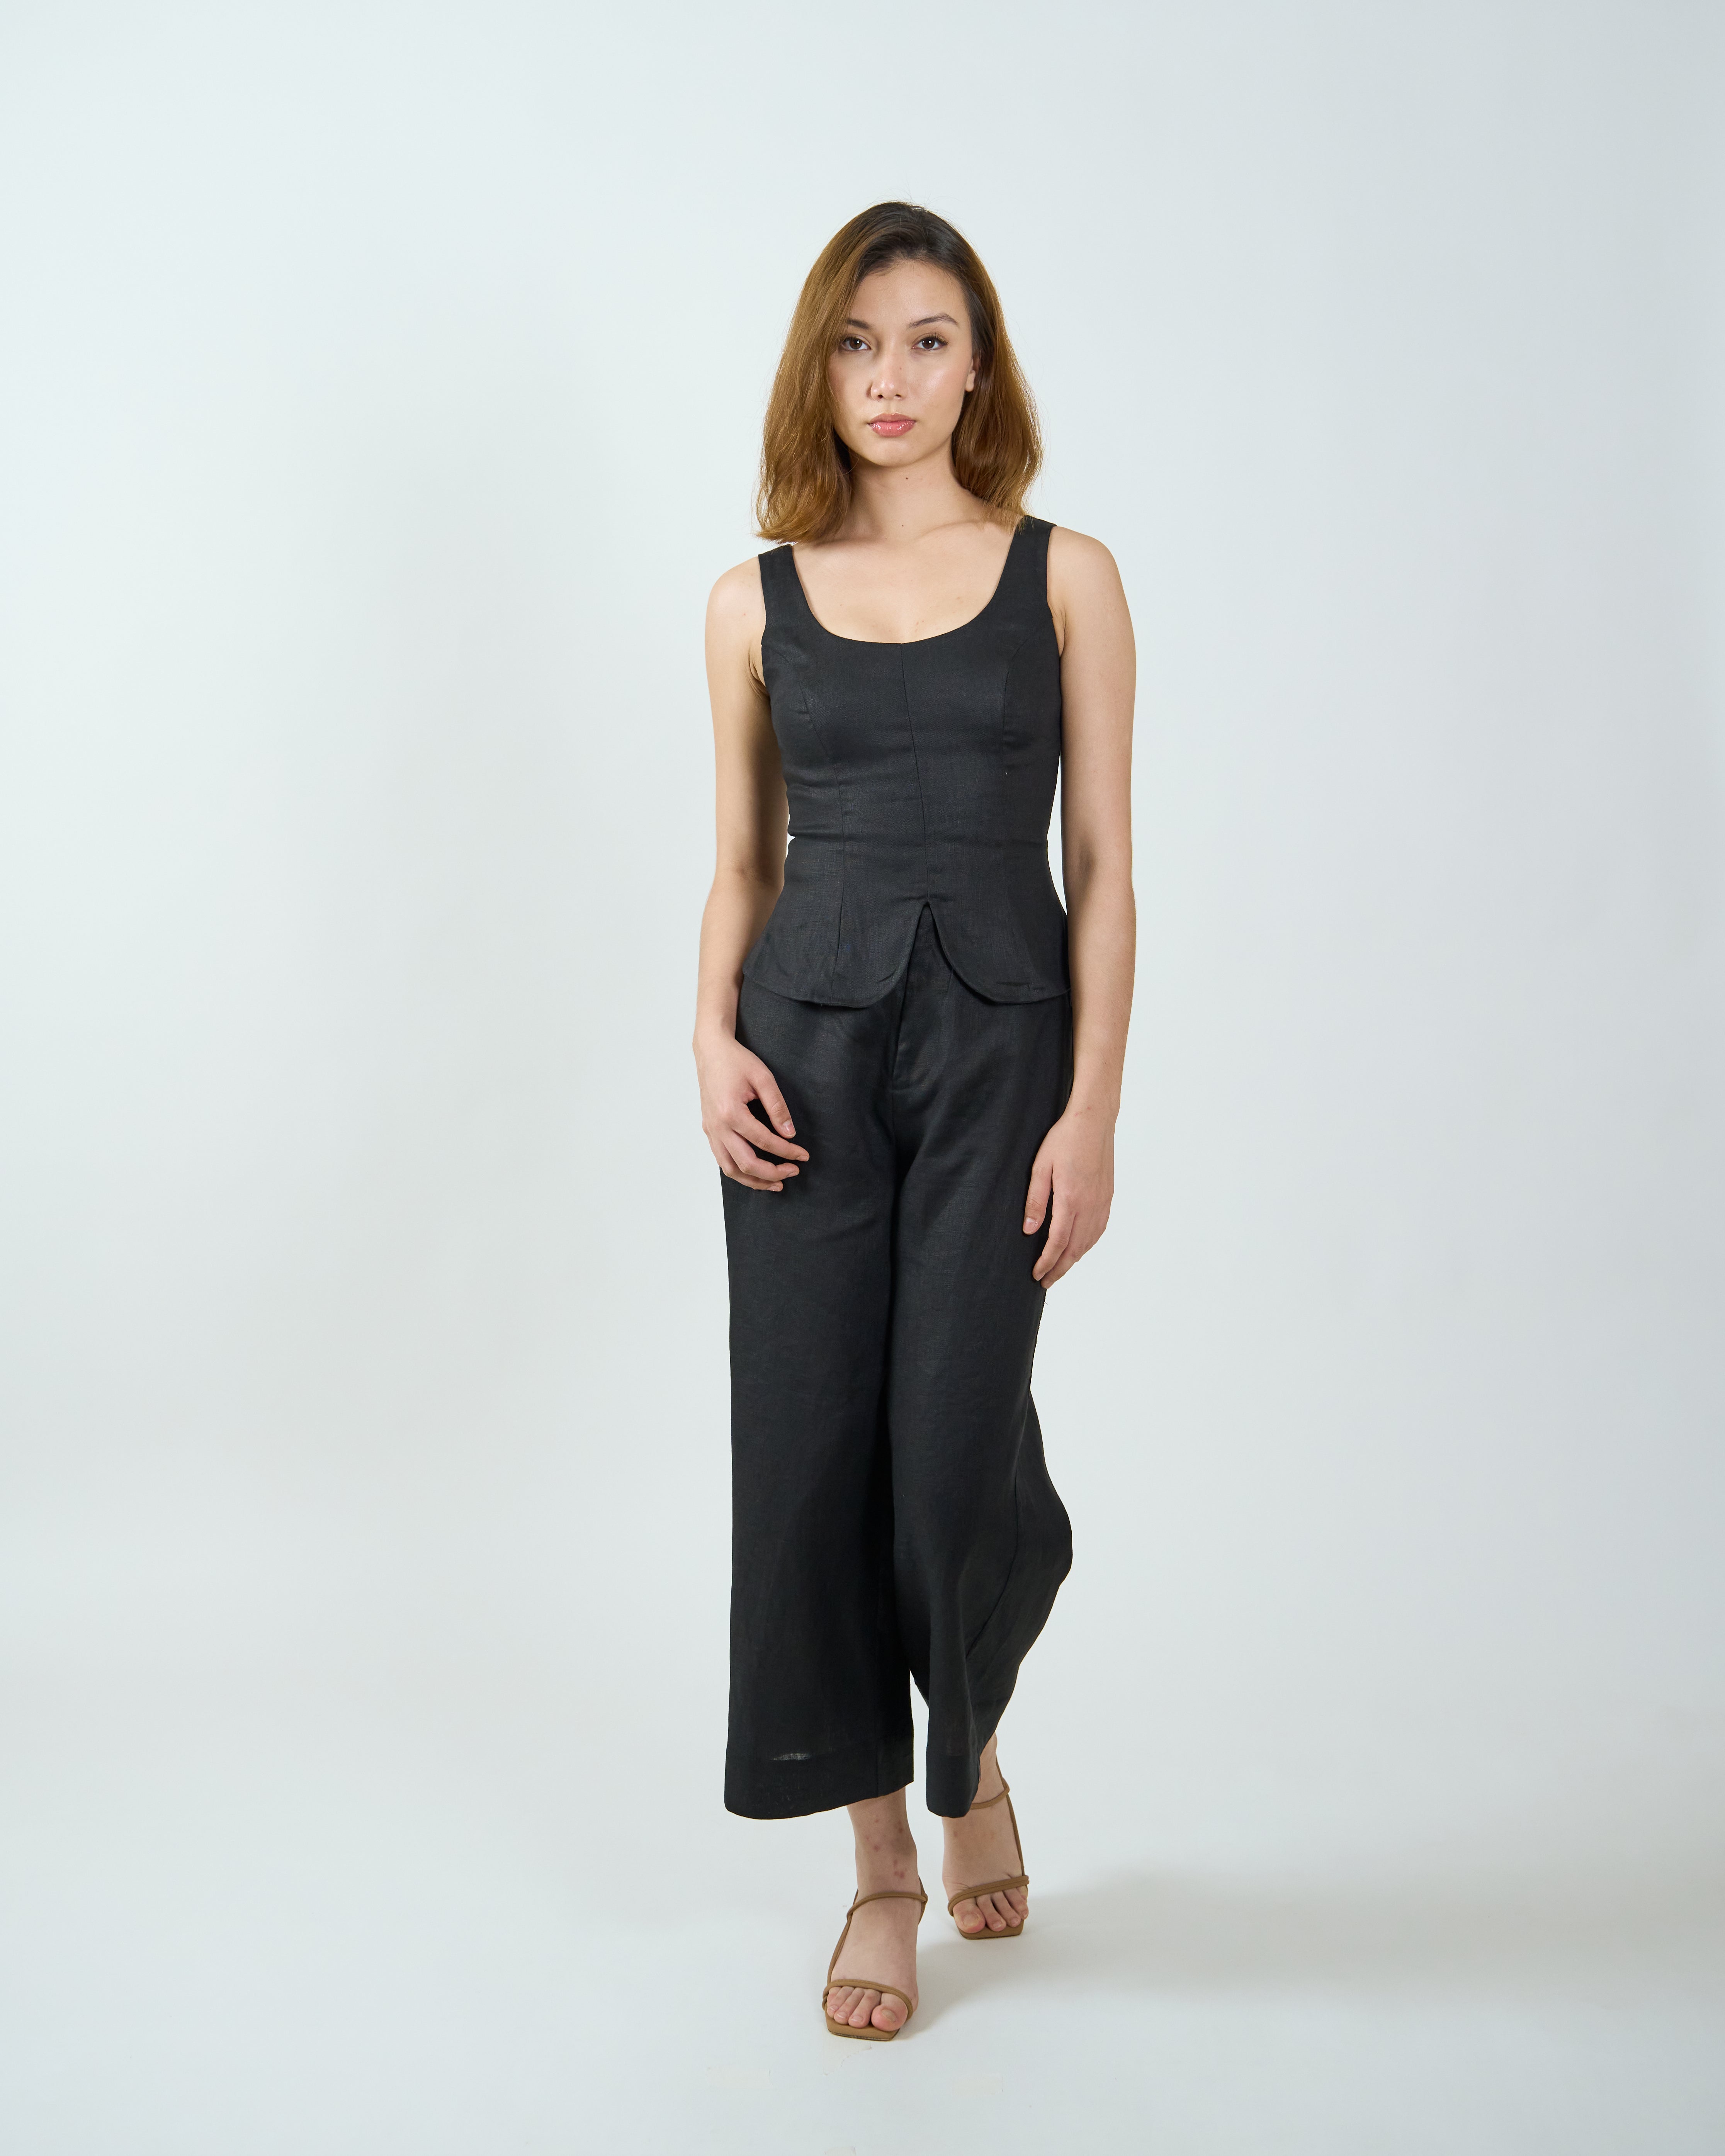 EASY CULOTTES in black